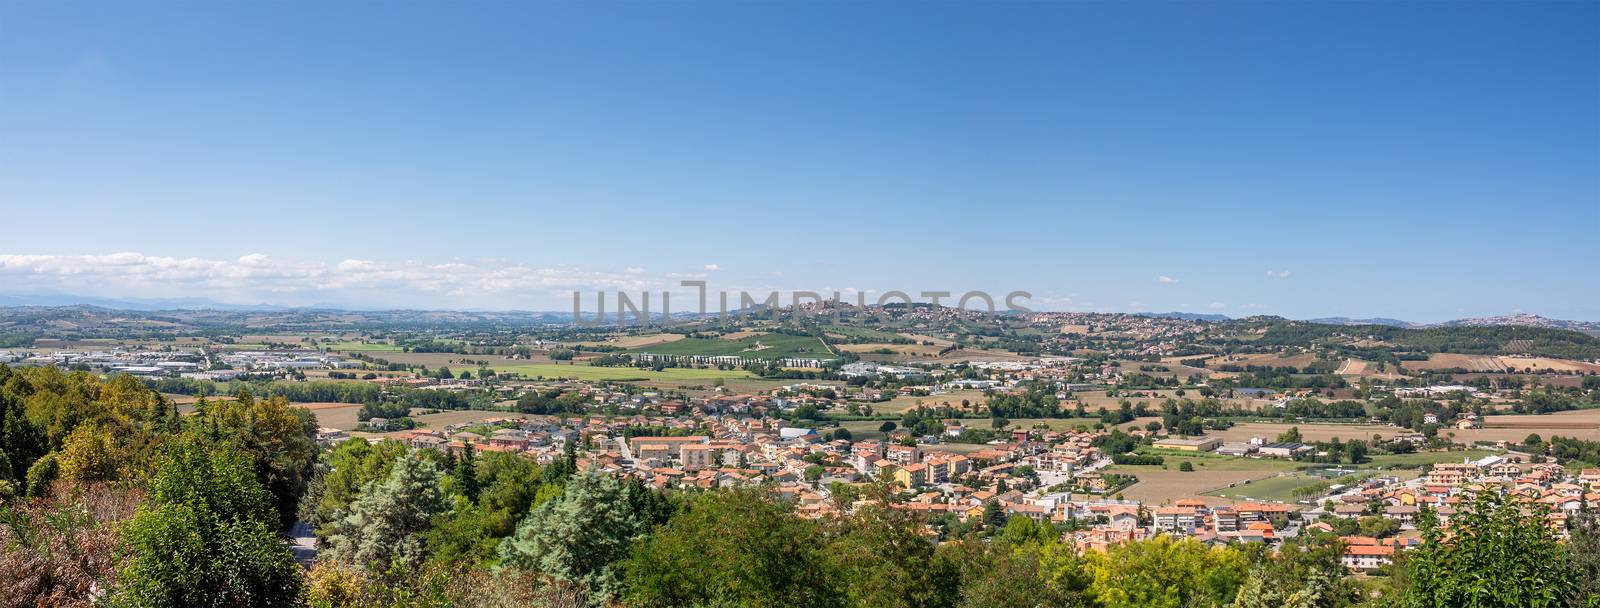 panoramic scenery in Italy Marche by magann